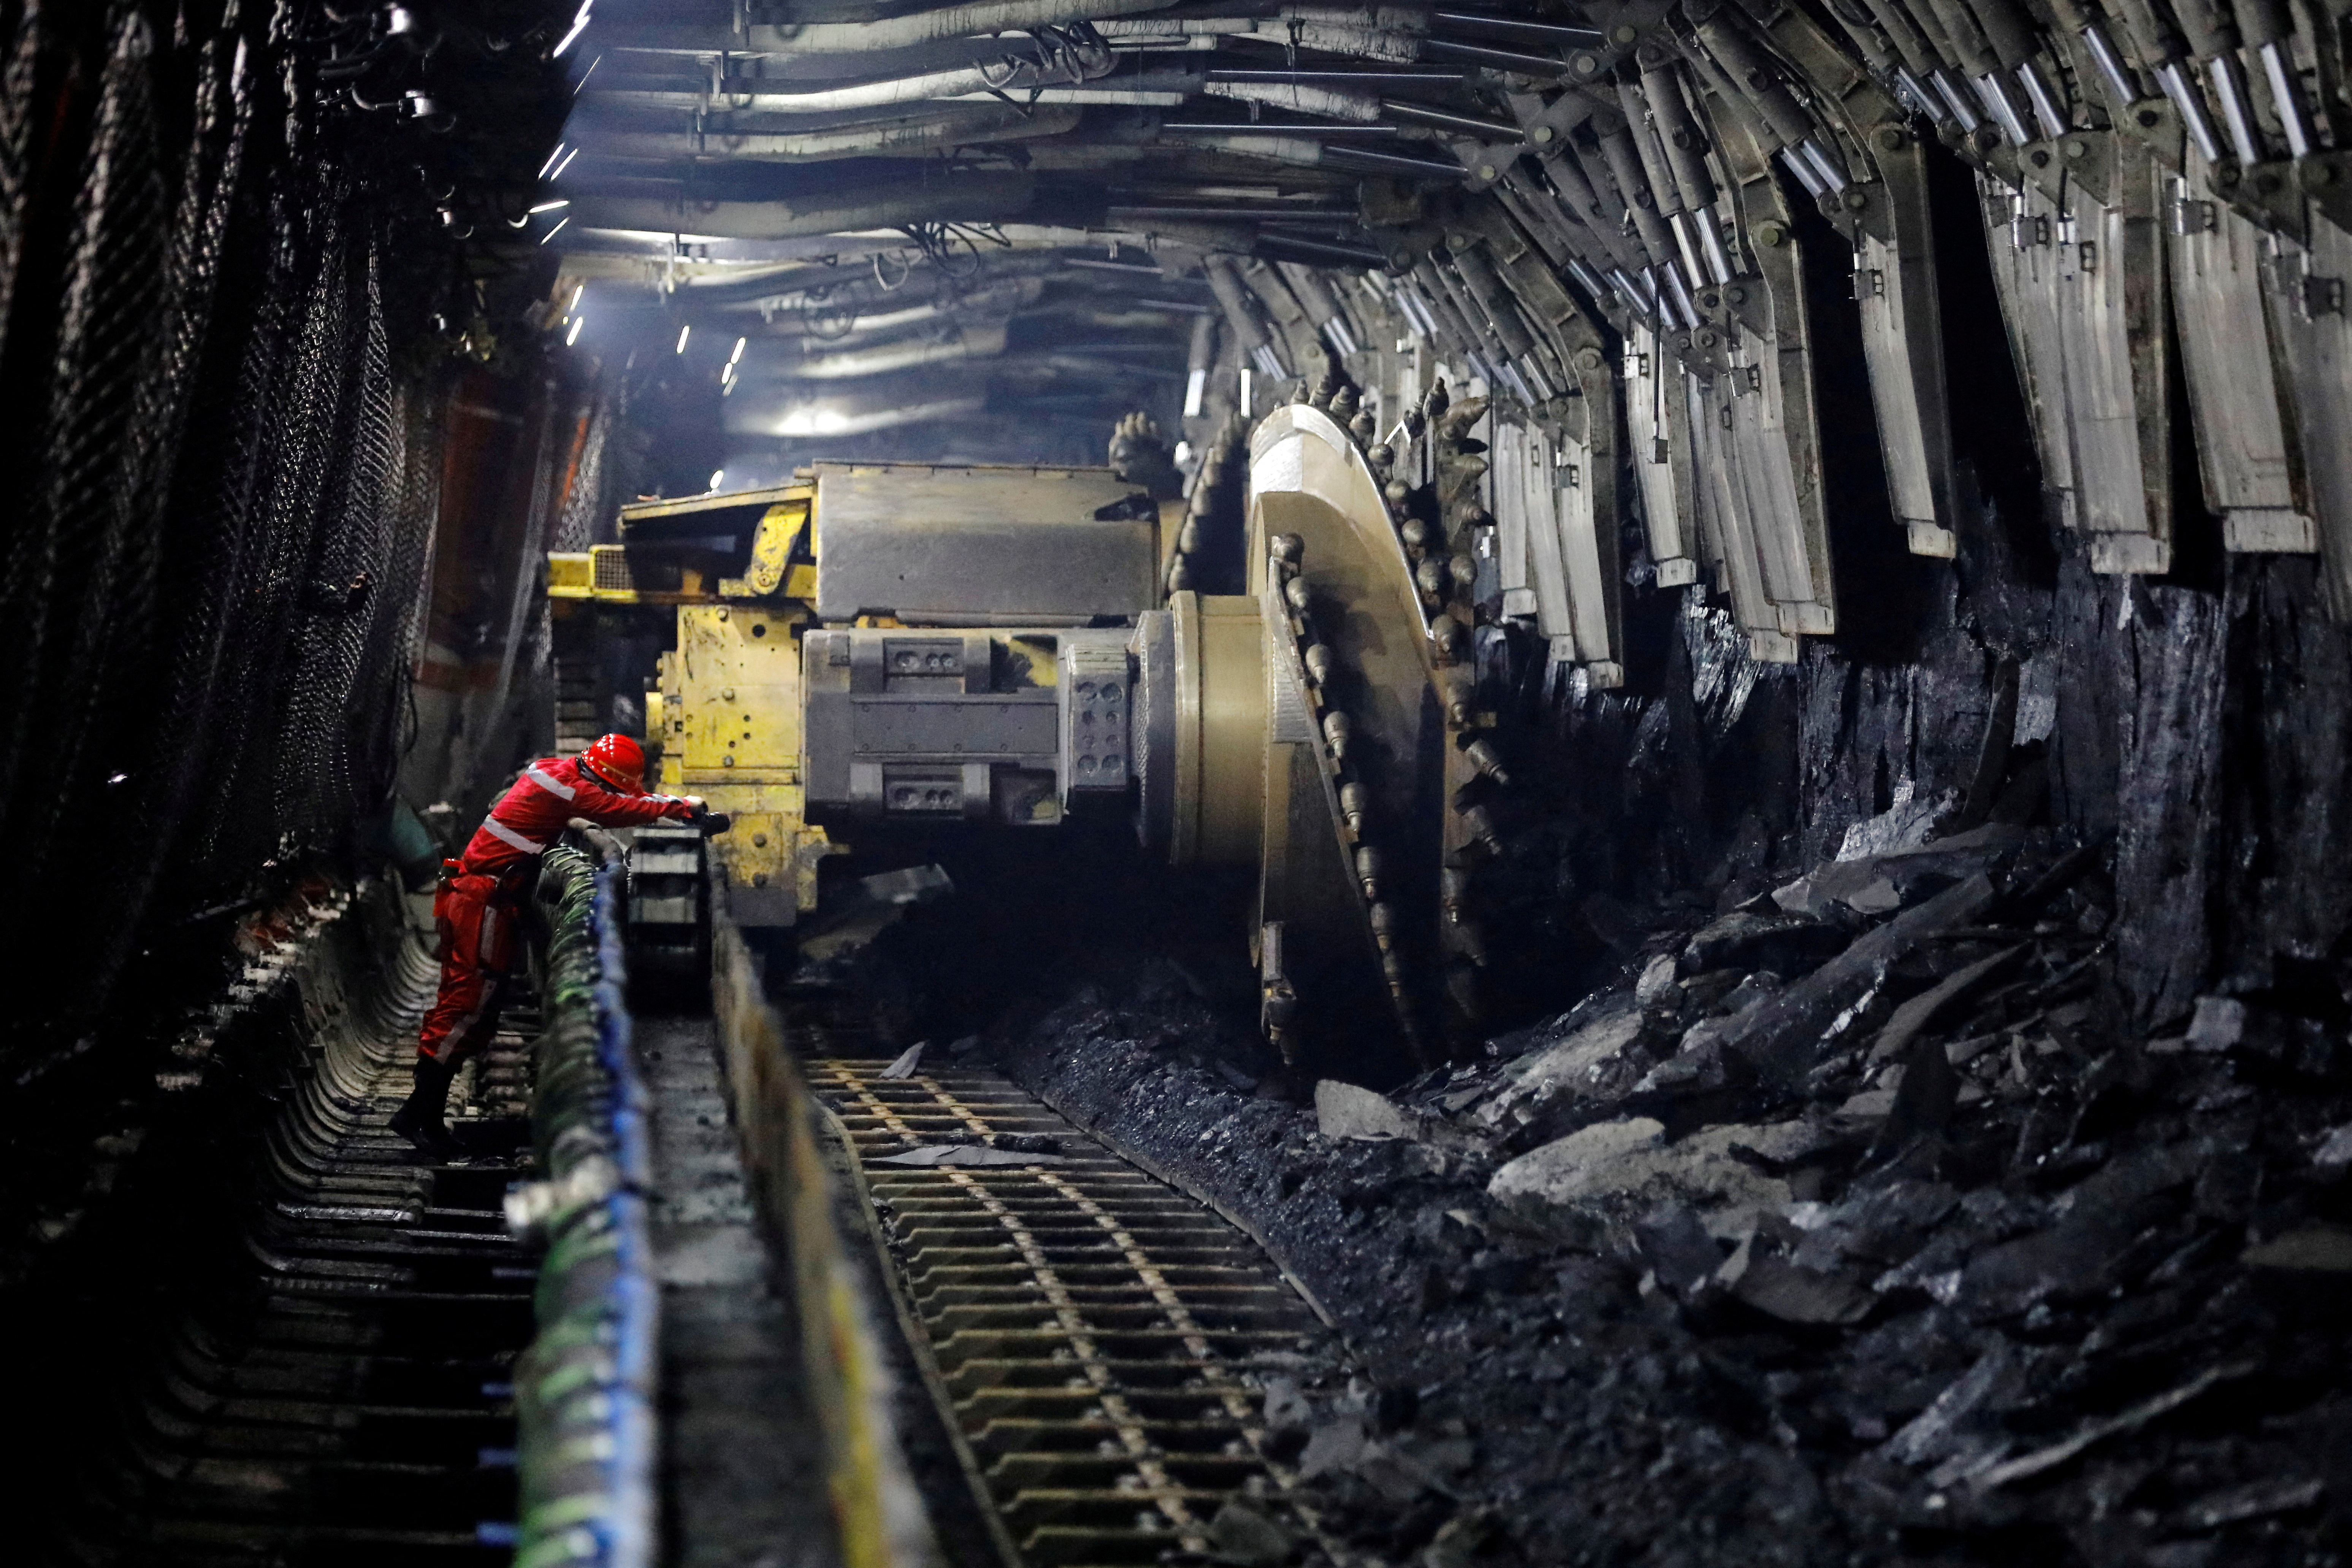 Huawei-organised media tour to coal mines in Shenmu, Yulin city of Shaanxi province, China